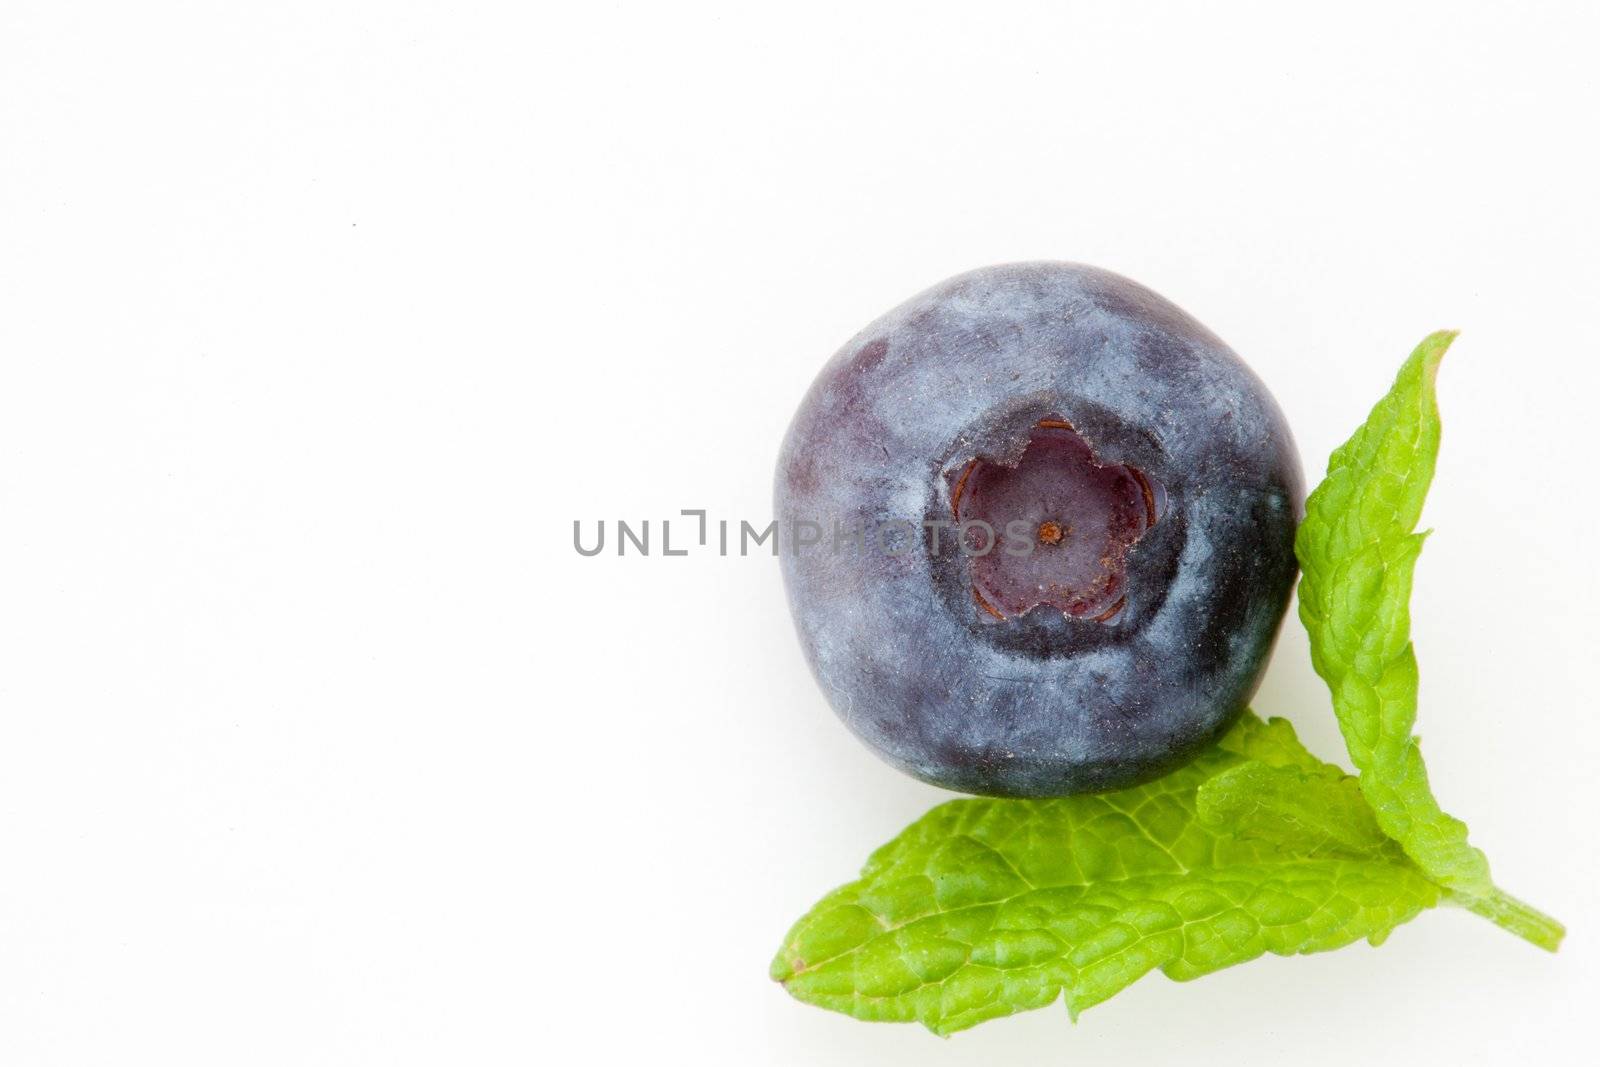 Blueberry against a white background